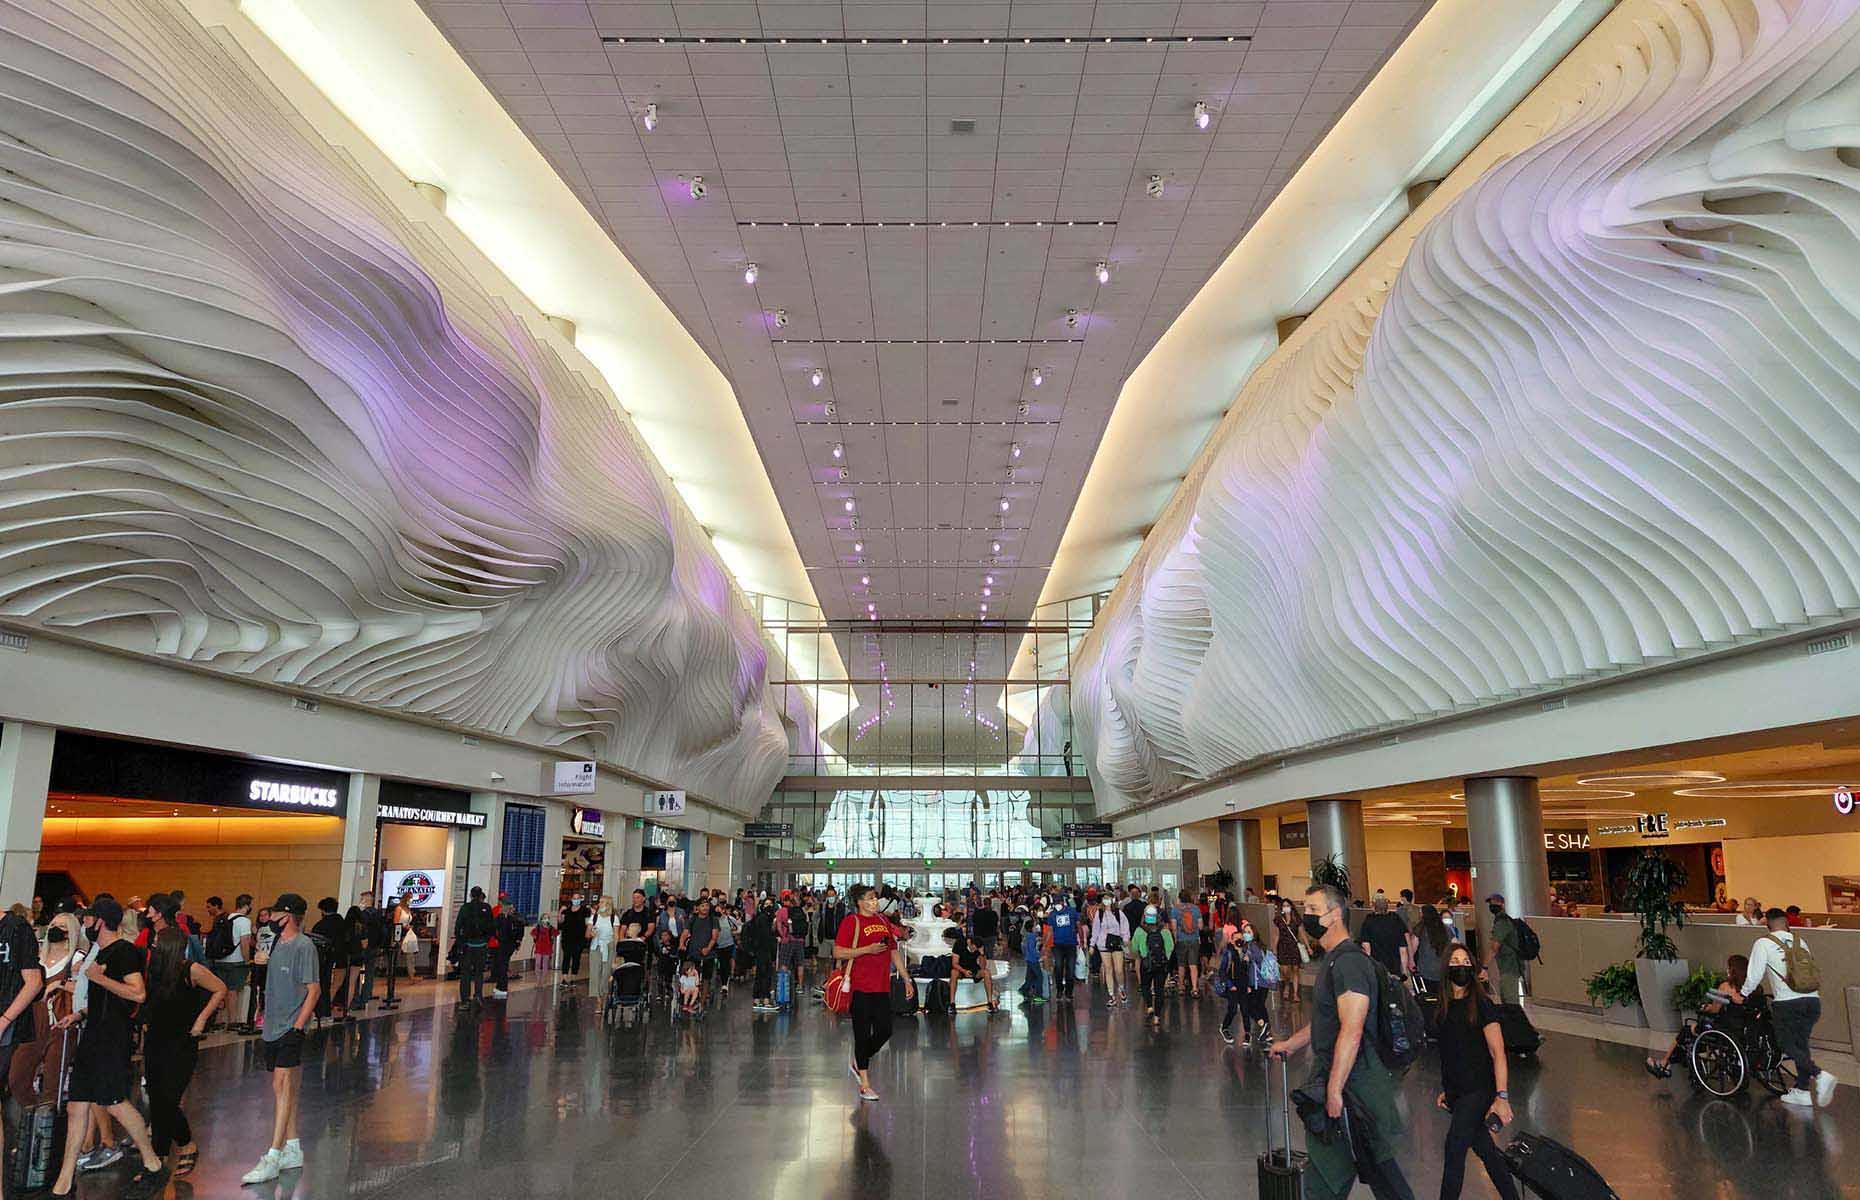 <p>Close to the city it serves, Salt Lake City International Airport moves up one place, with a score of 826. In September 2020, it opened the first part of its $4.1 billion renovation project: a concourse which includes extensive parking space, high-tech technology at security gates and modern waiting areas. Works are due to be completed in 2024, which may send the airport higher and higher in the customer satisfaction rankings. </p>  <p><a href="https://www.loveexploring.com/guides/87130/things-to-do-road-trip-south-utah"><strong>Discover what south Utah has to offer here</strong></a></p>